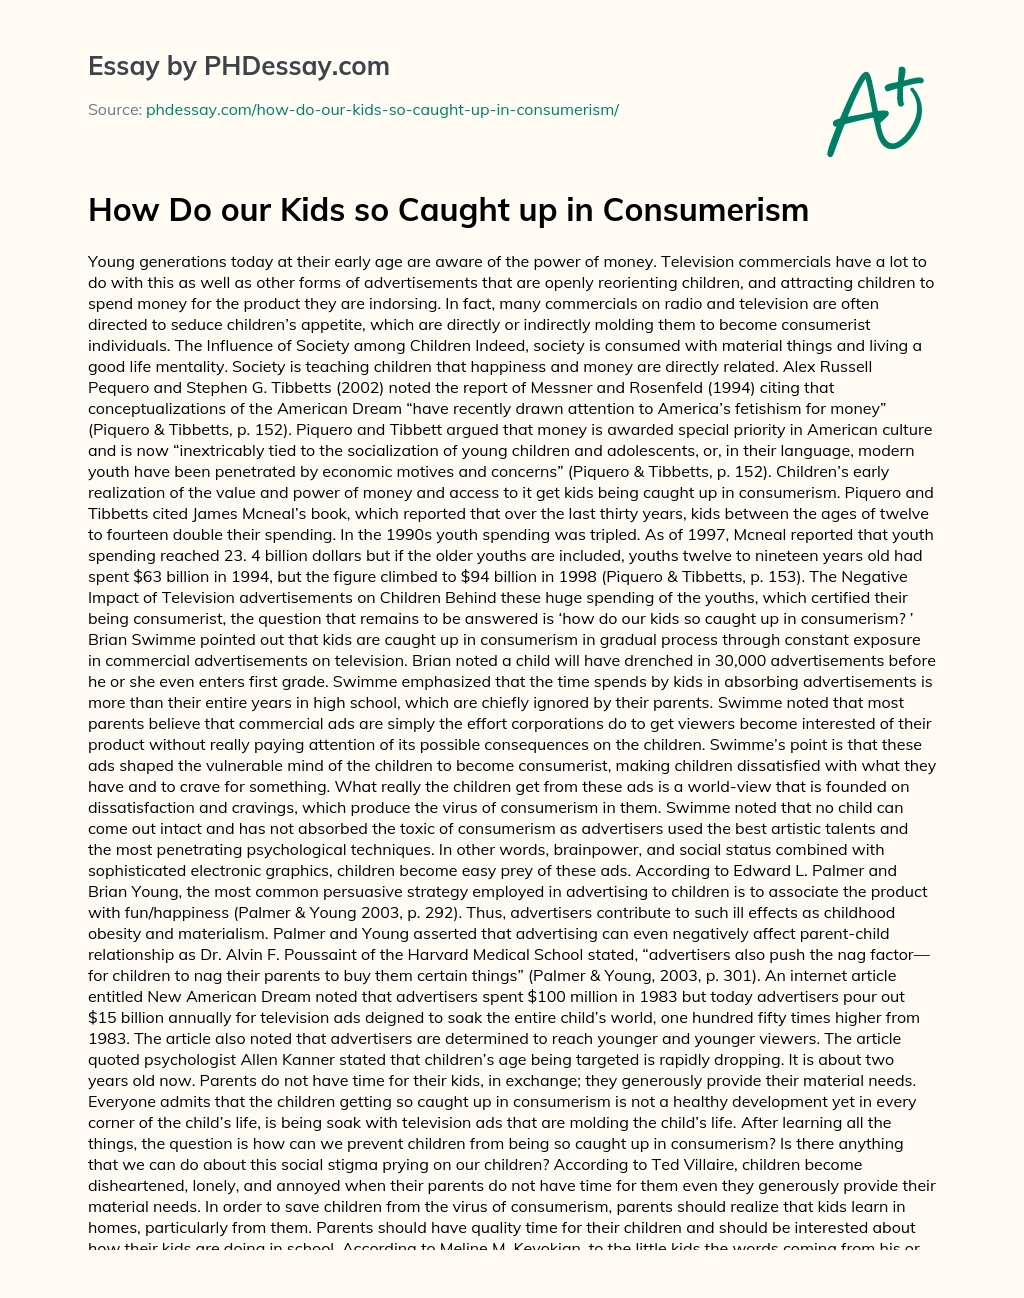 How Do our Kids so Caught up in Consumerism essay